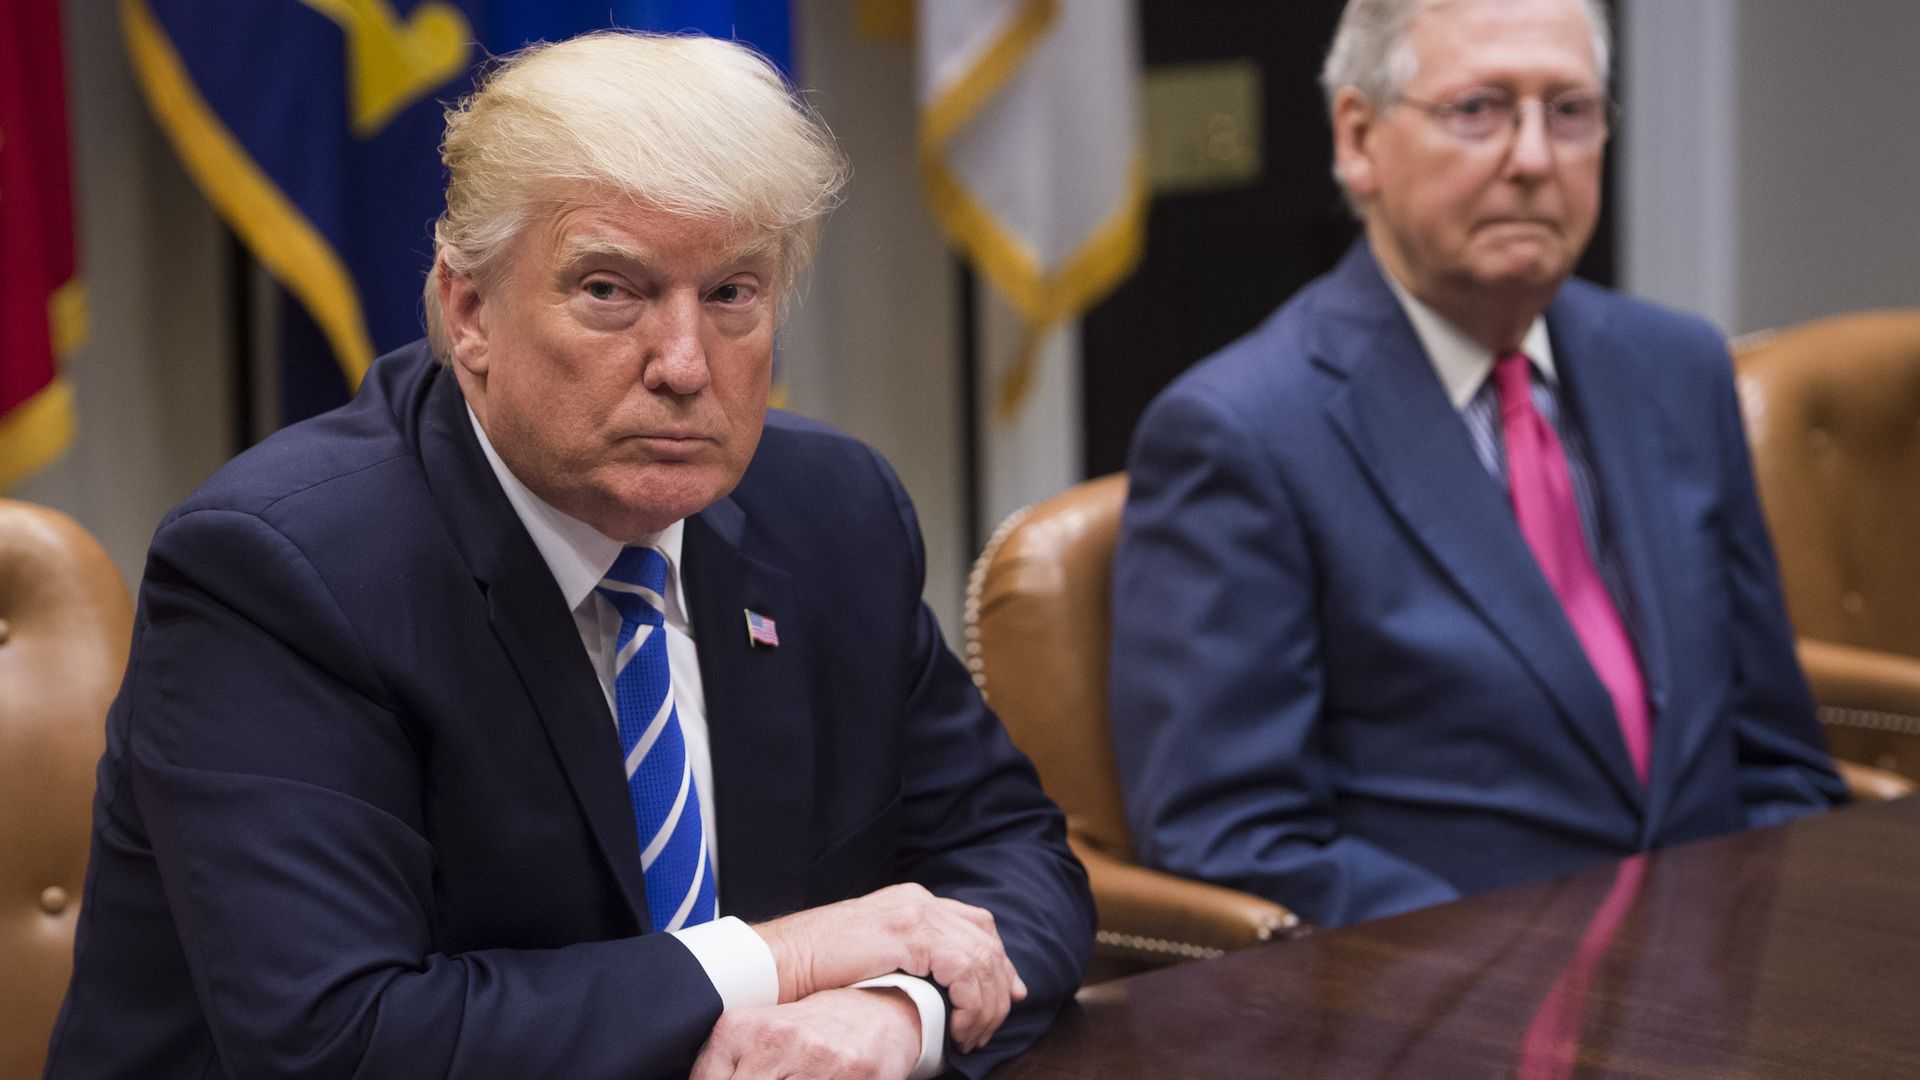 President Donald Trump and Senate Majority Leader Mitch McConnell 